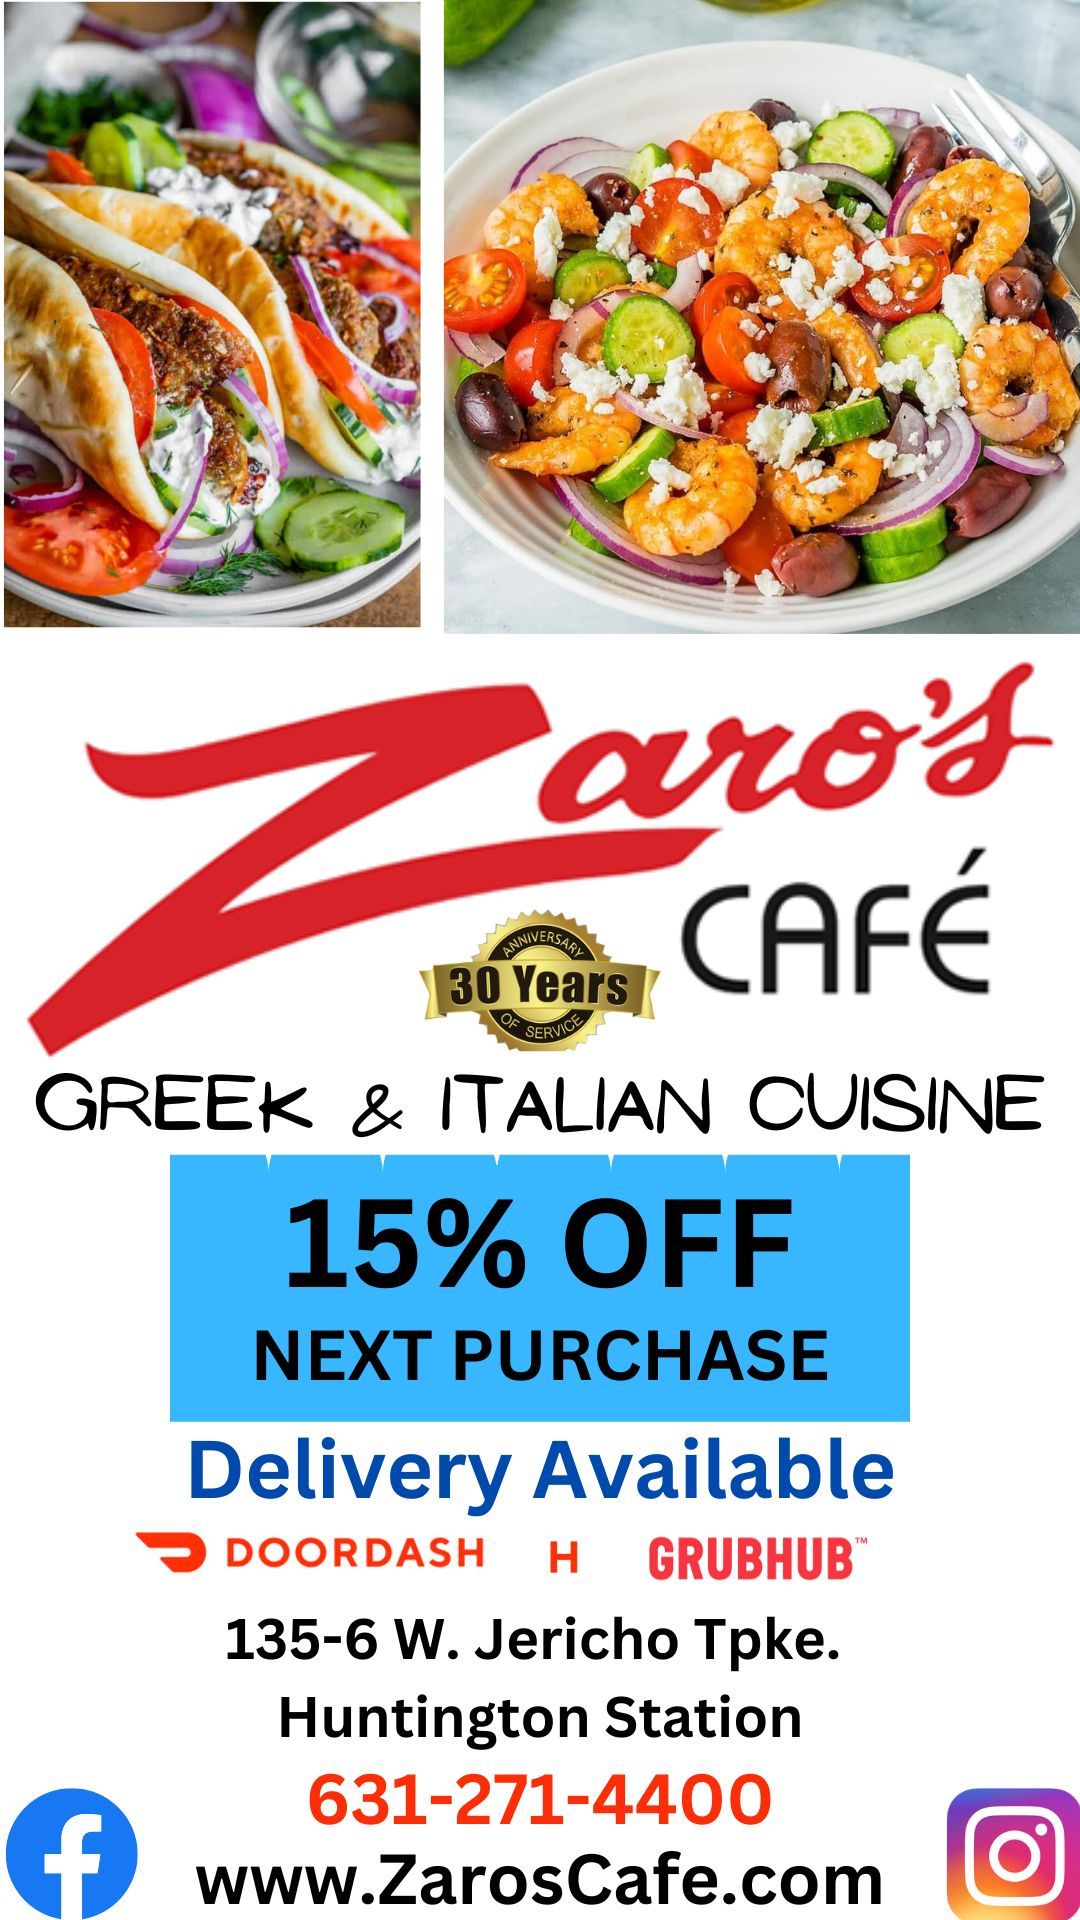 An advertisement for zaros cafe greek and italian cuisine